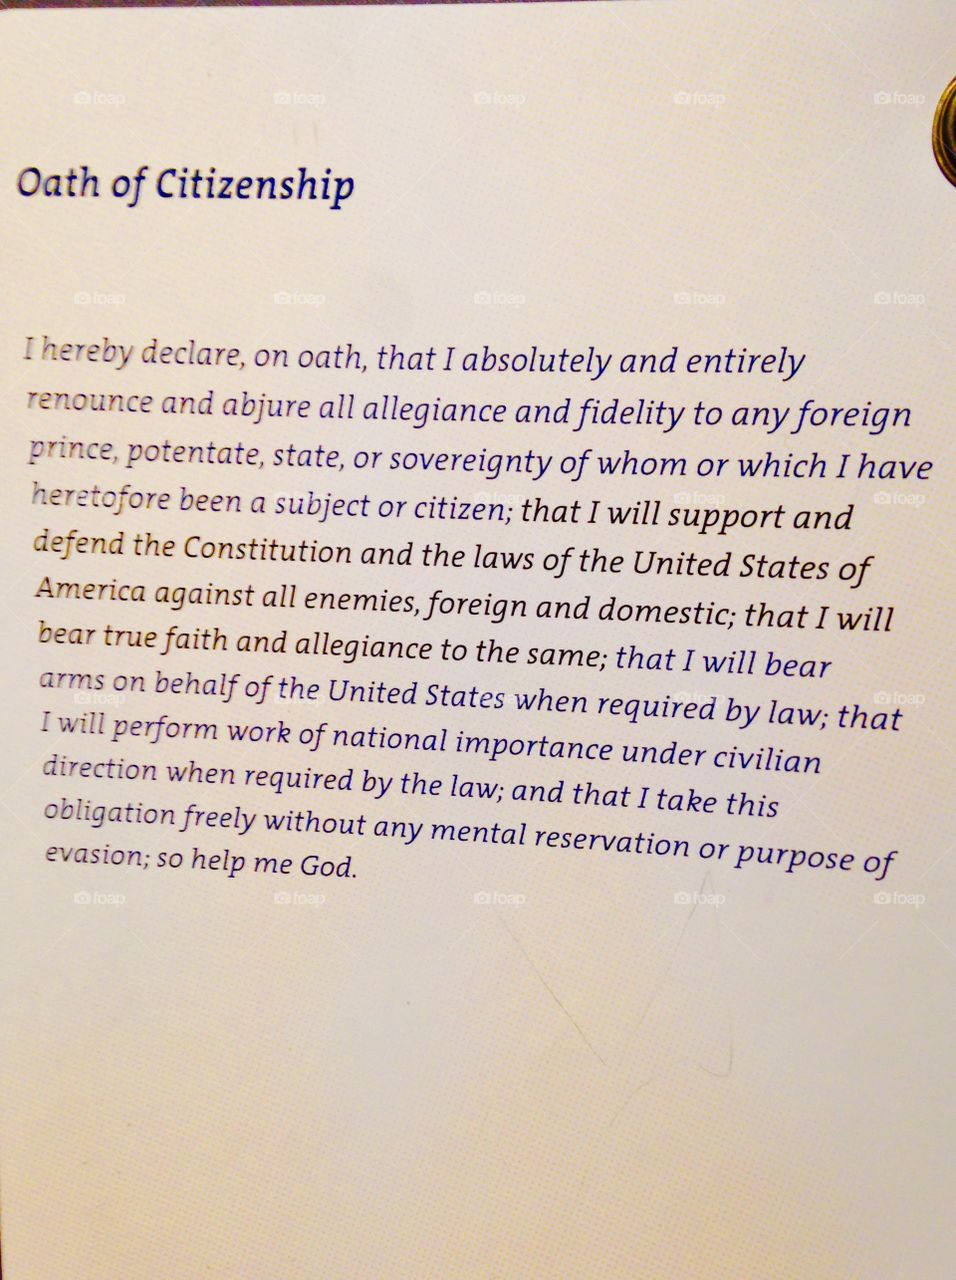 Oath or Citizenship